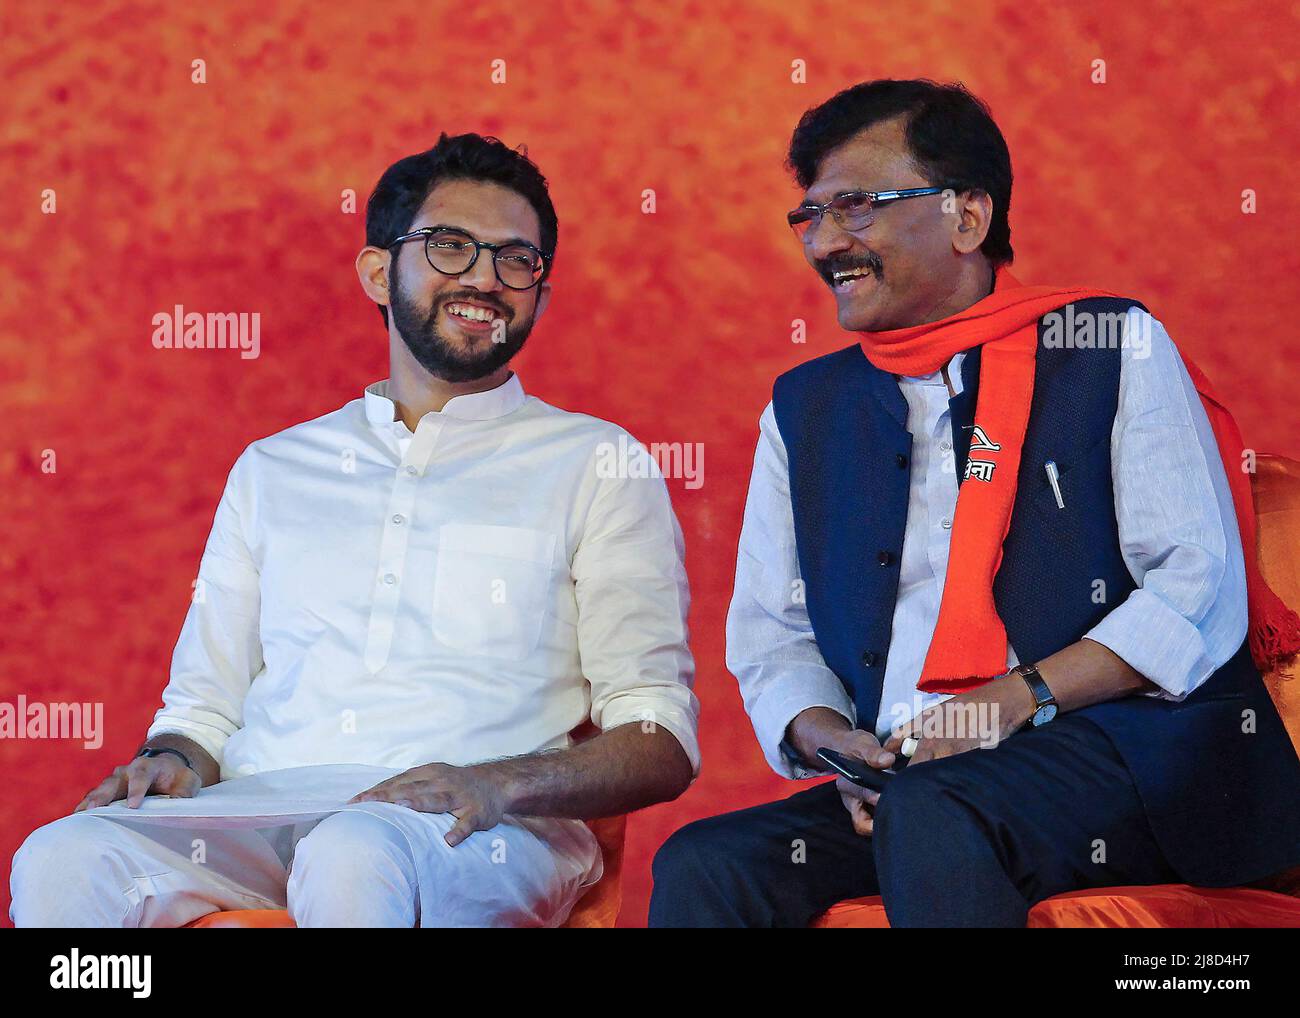 L-R Cabinet Minister of Tourism and Environment (Maharashtra), Aditya Thackeray and Sanjay Raut, Shiv Sena Member of Parliament (Maharashtra) share a laugh during the Shiv Sena rally. The rally marked the beginning of the party's second phase of 'Shiv Sampark Abhiyan' party's outreach programme with the voters and karyakartas (workers). Stock Photo